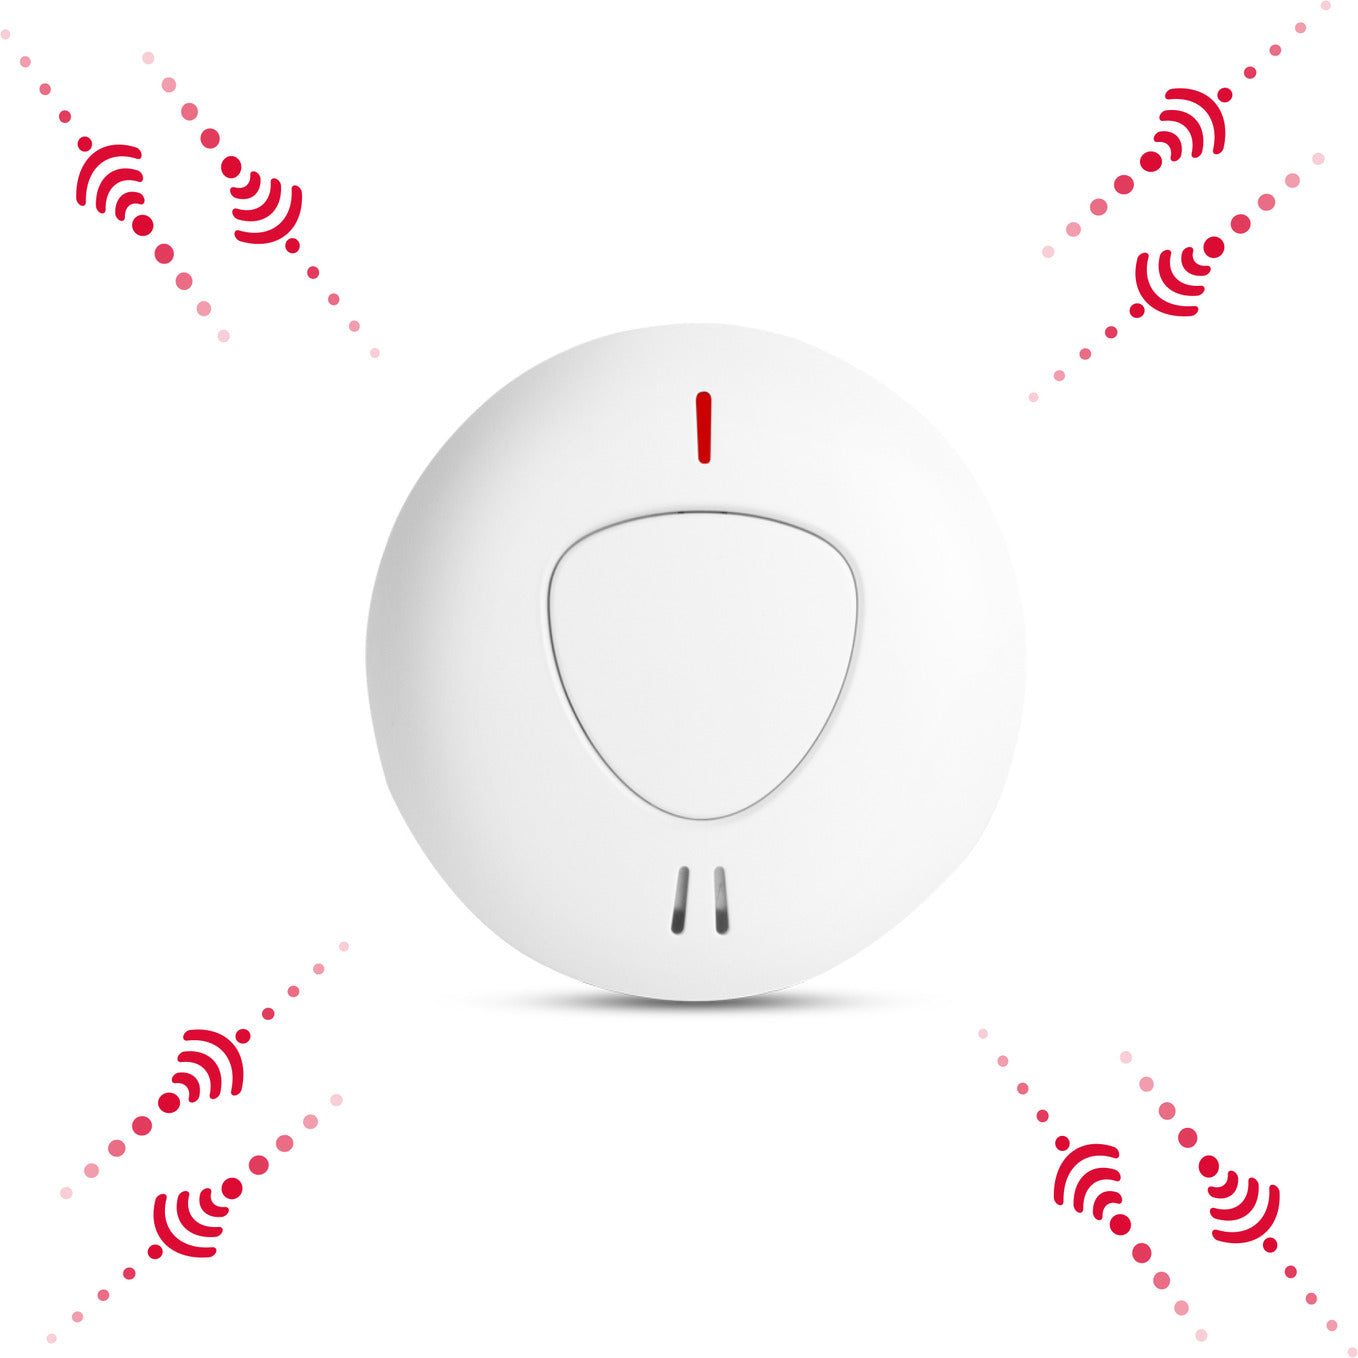 Firexo 4 Unit Interlinked Optical Smoke Alarm, Heat Alarm, and Carbon Monoxide Alarm Multipack with 10 Year Tamper Proof Battery, White. 2x Smoke Alarm, 1x Heat Alarm, 1x Carbon Monoxide alarm